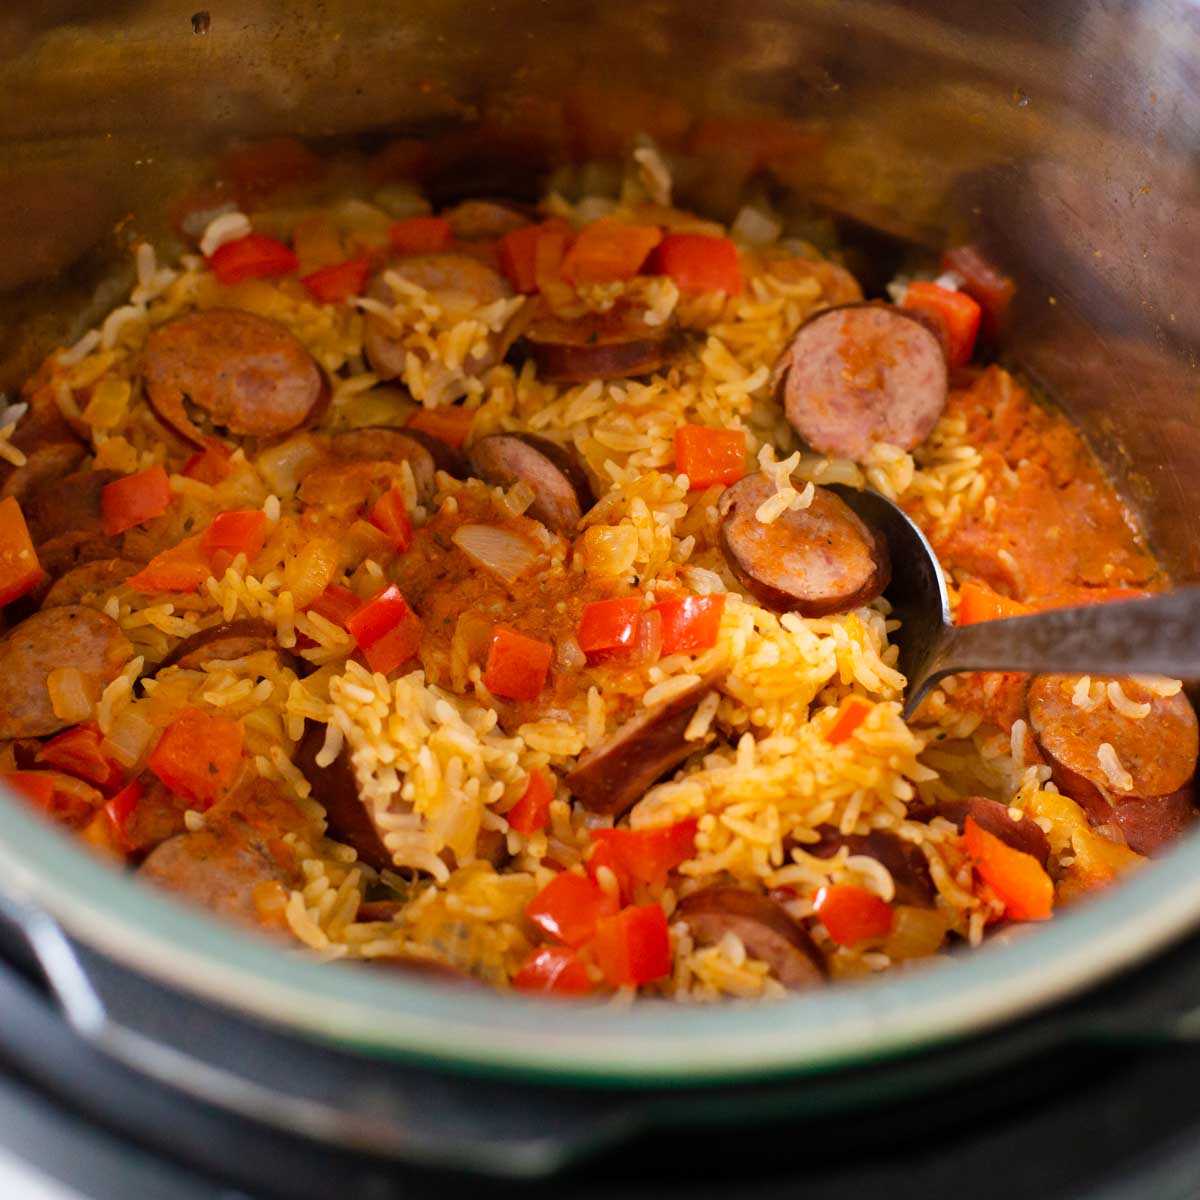 A spicy sausage and rice inside the Instant Pot.